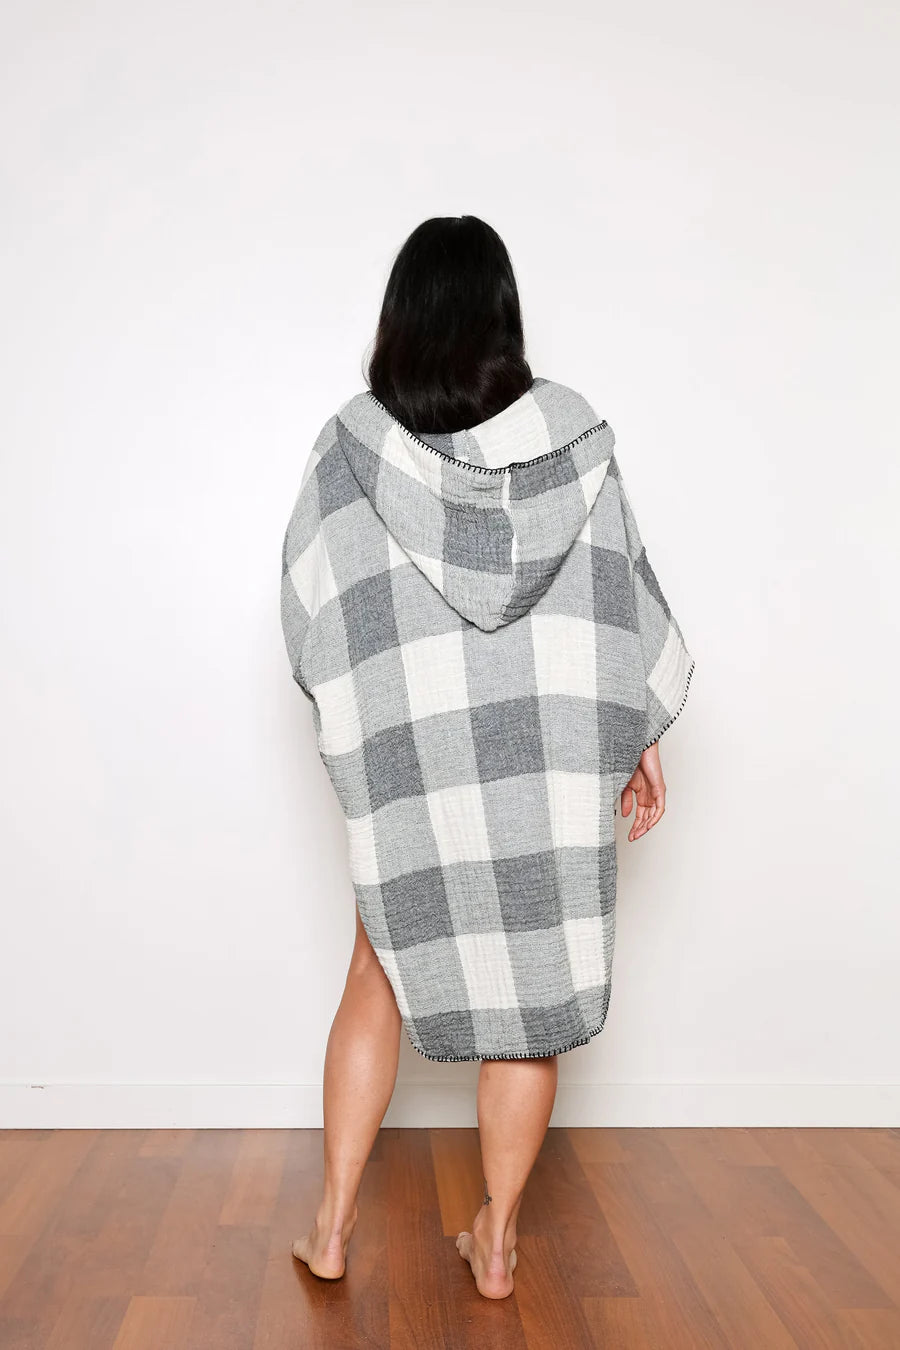 The Limited Edition Plaid Cocoon Poncho| Women's